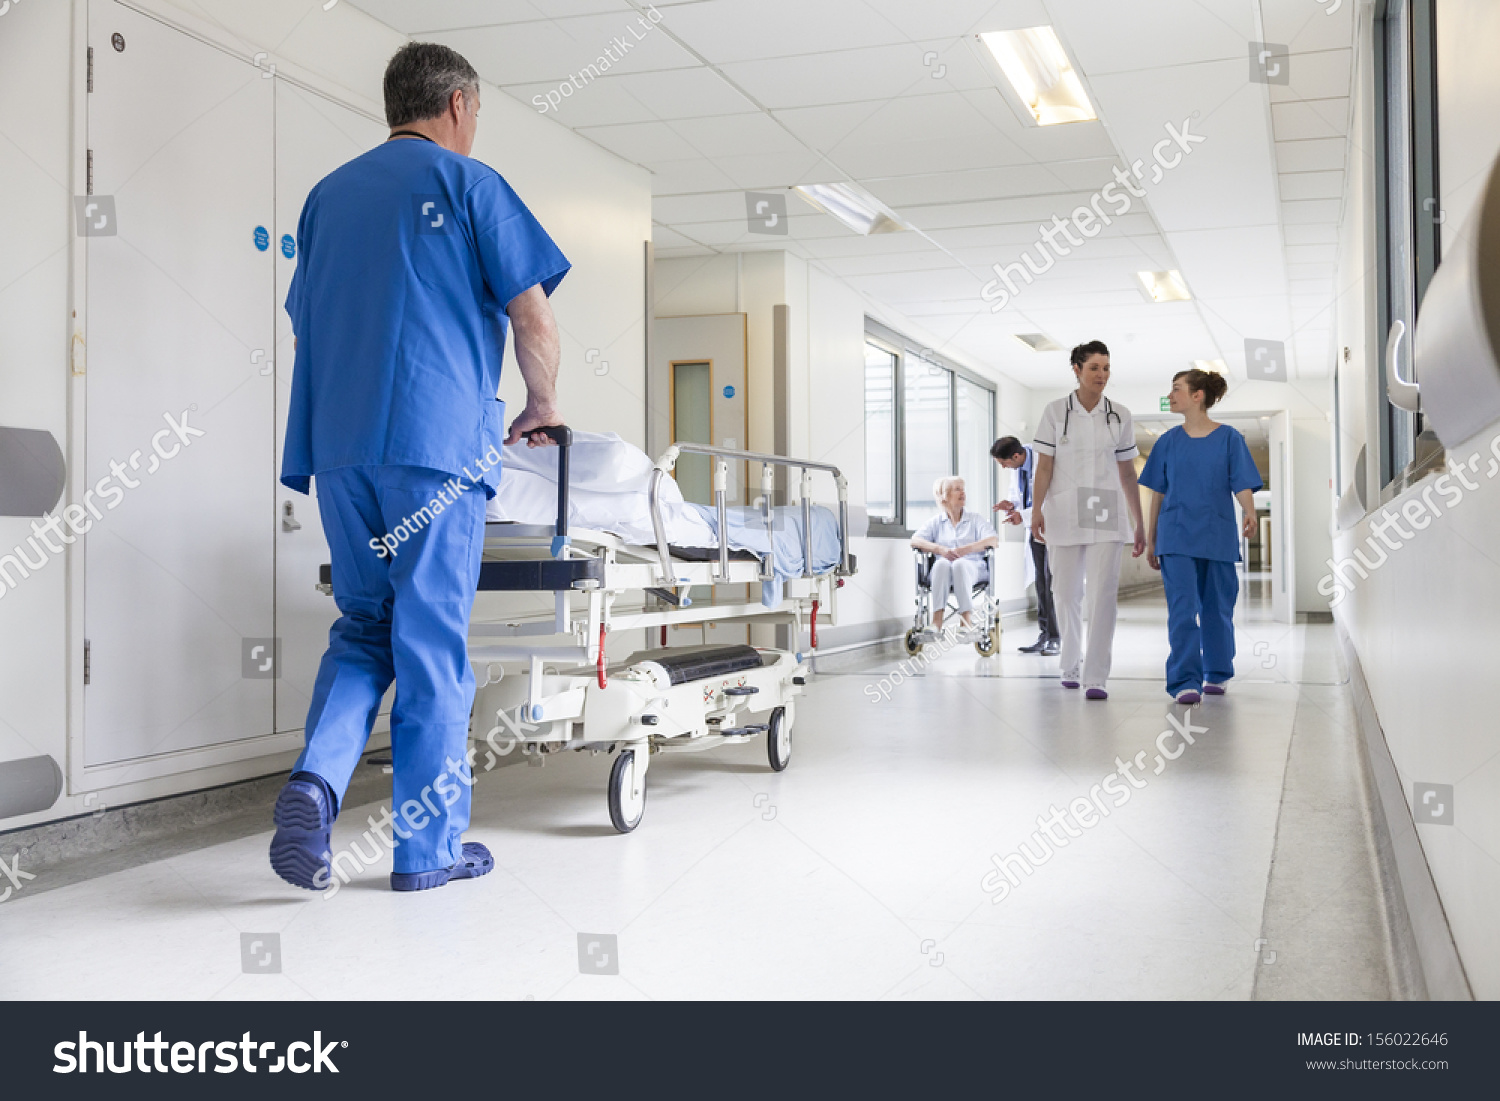 Male nurse pushing stretcher gurney bed in hospital corridor with doctors & senior female patient #156022646